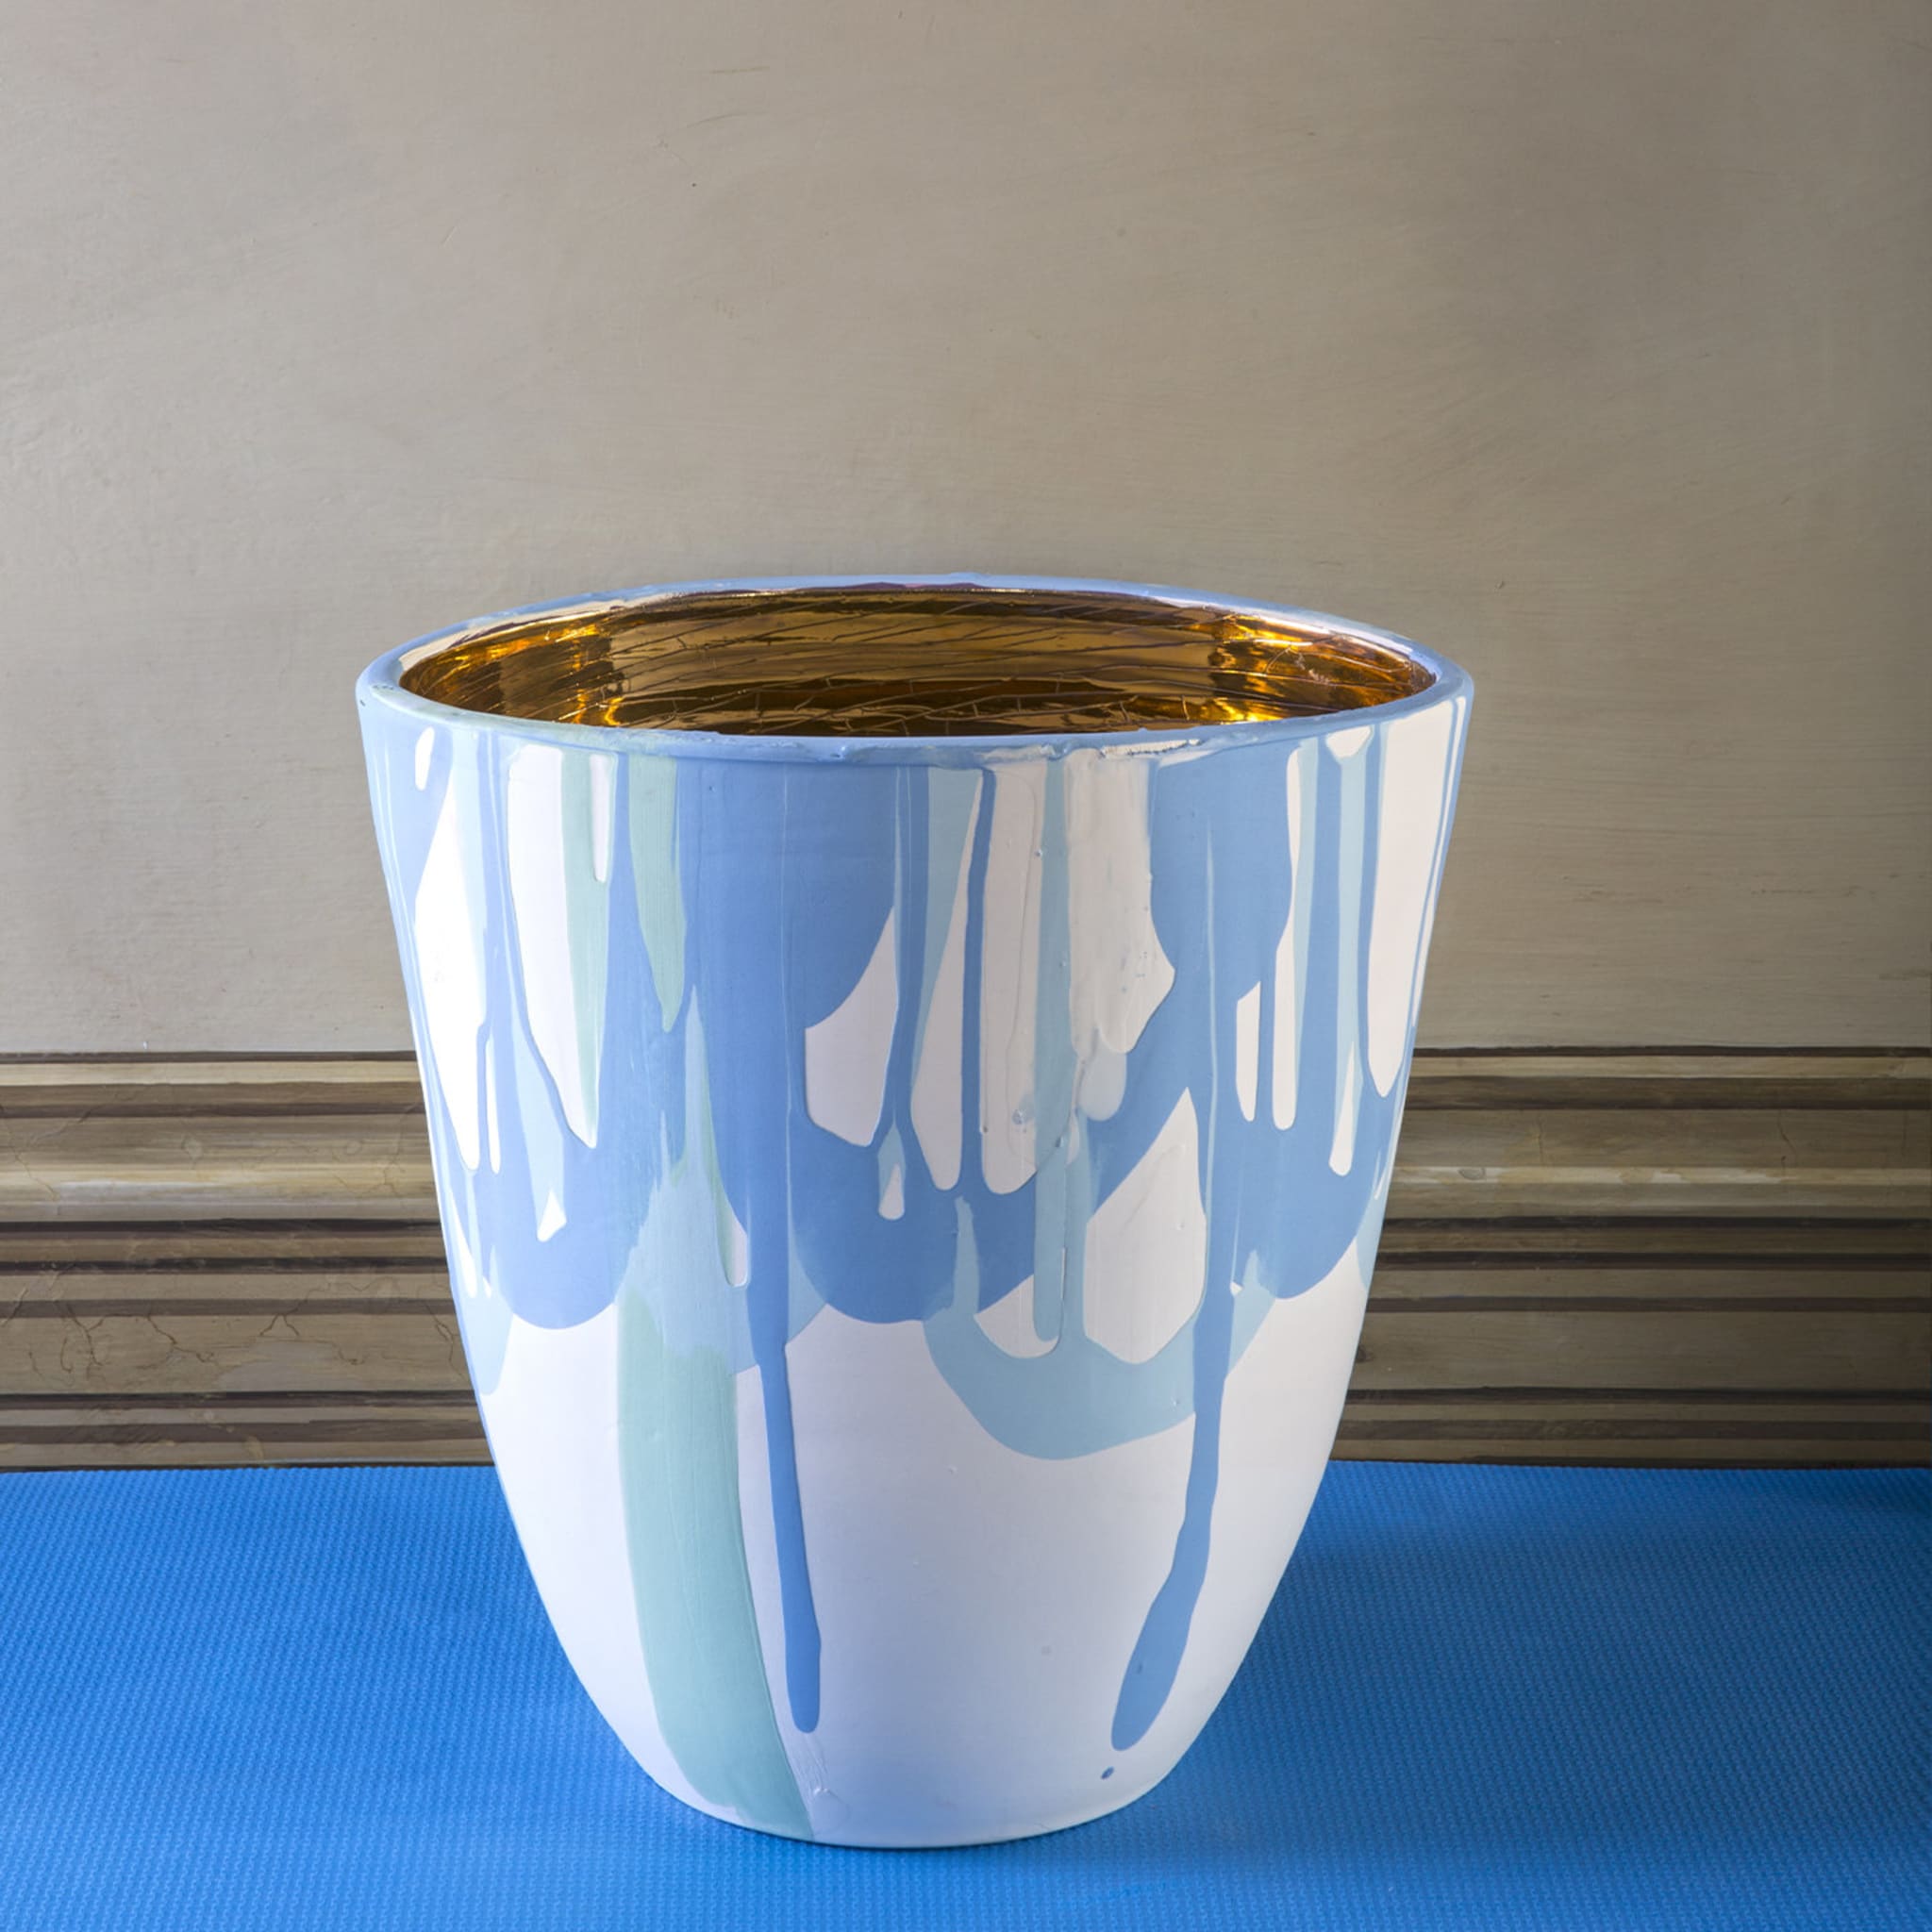 Light Blue and Gold Vase - Alternative view 1